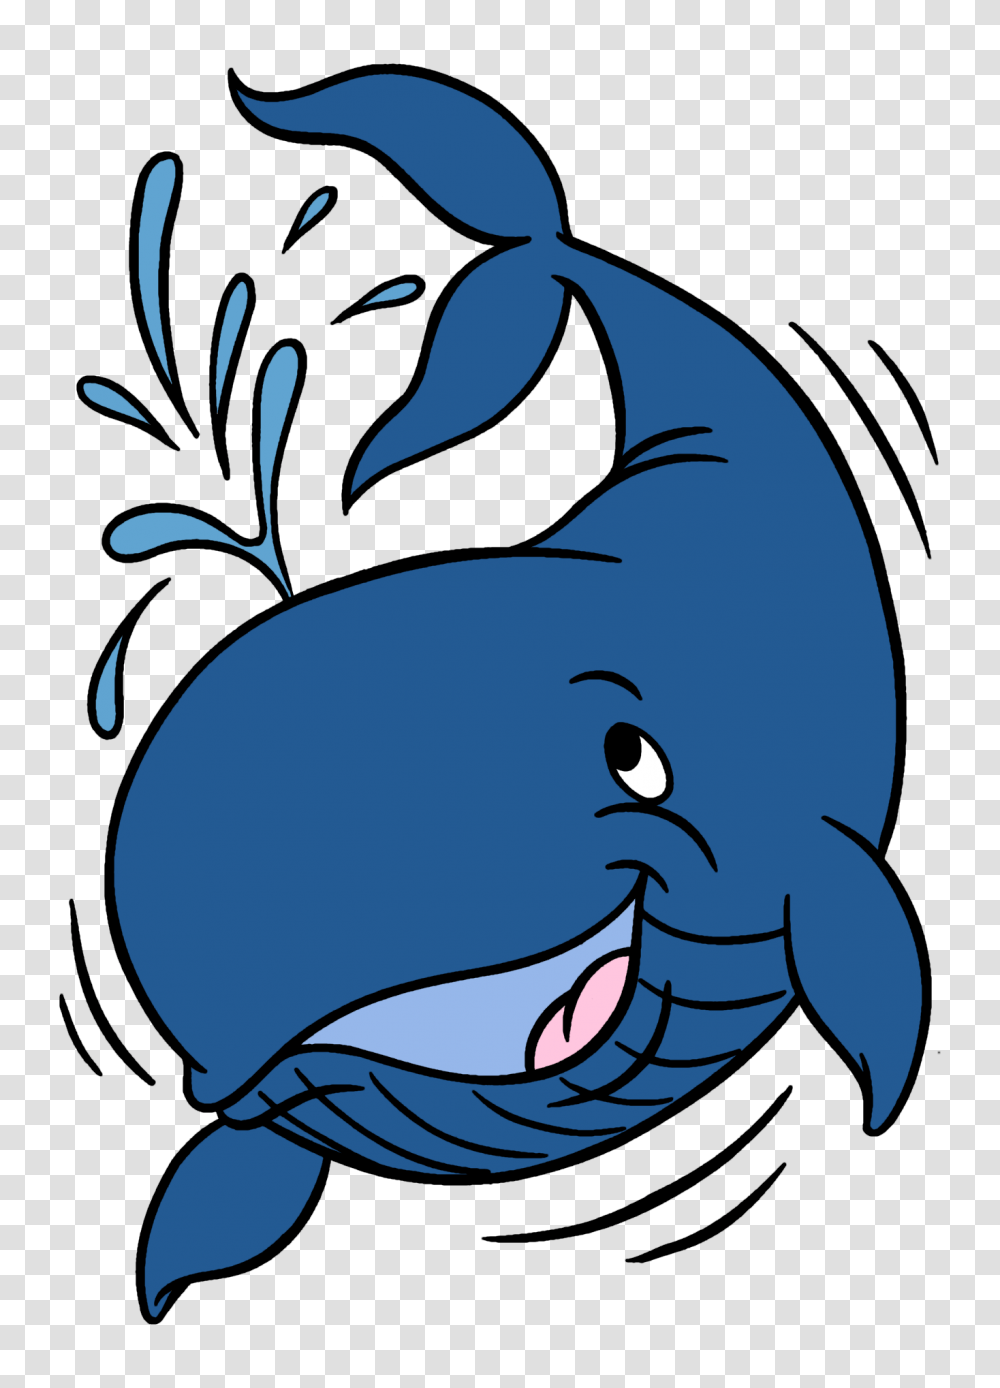 Whale Clipart Fishing Cartoons Clip Art Whale And Sea, Mammal, Animal, Sea Life Transparent Png